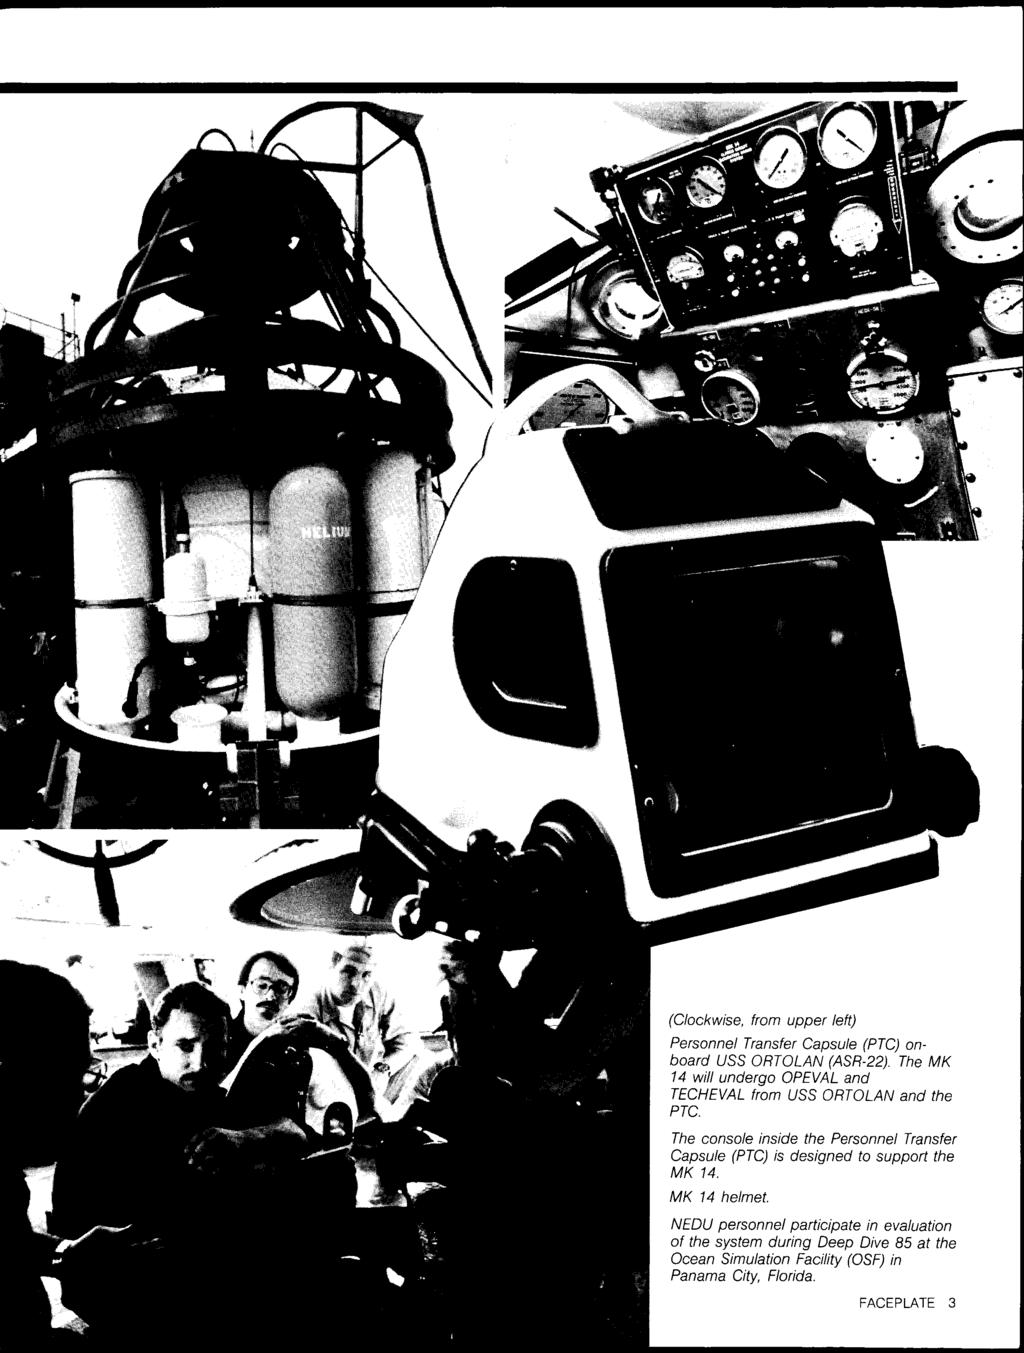 (Clockwise, from upper left) Personnel Transfer Capsule (PTC) onboard